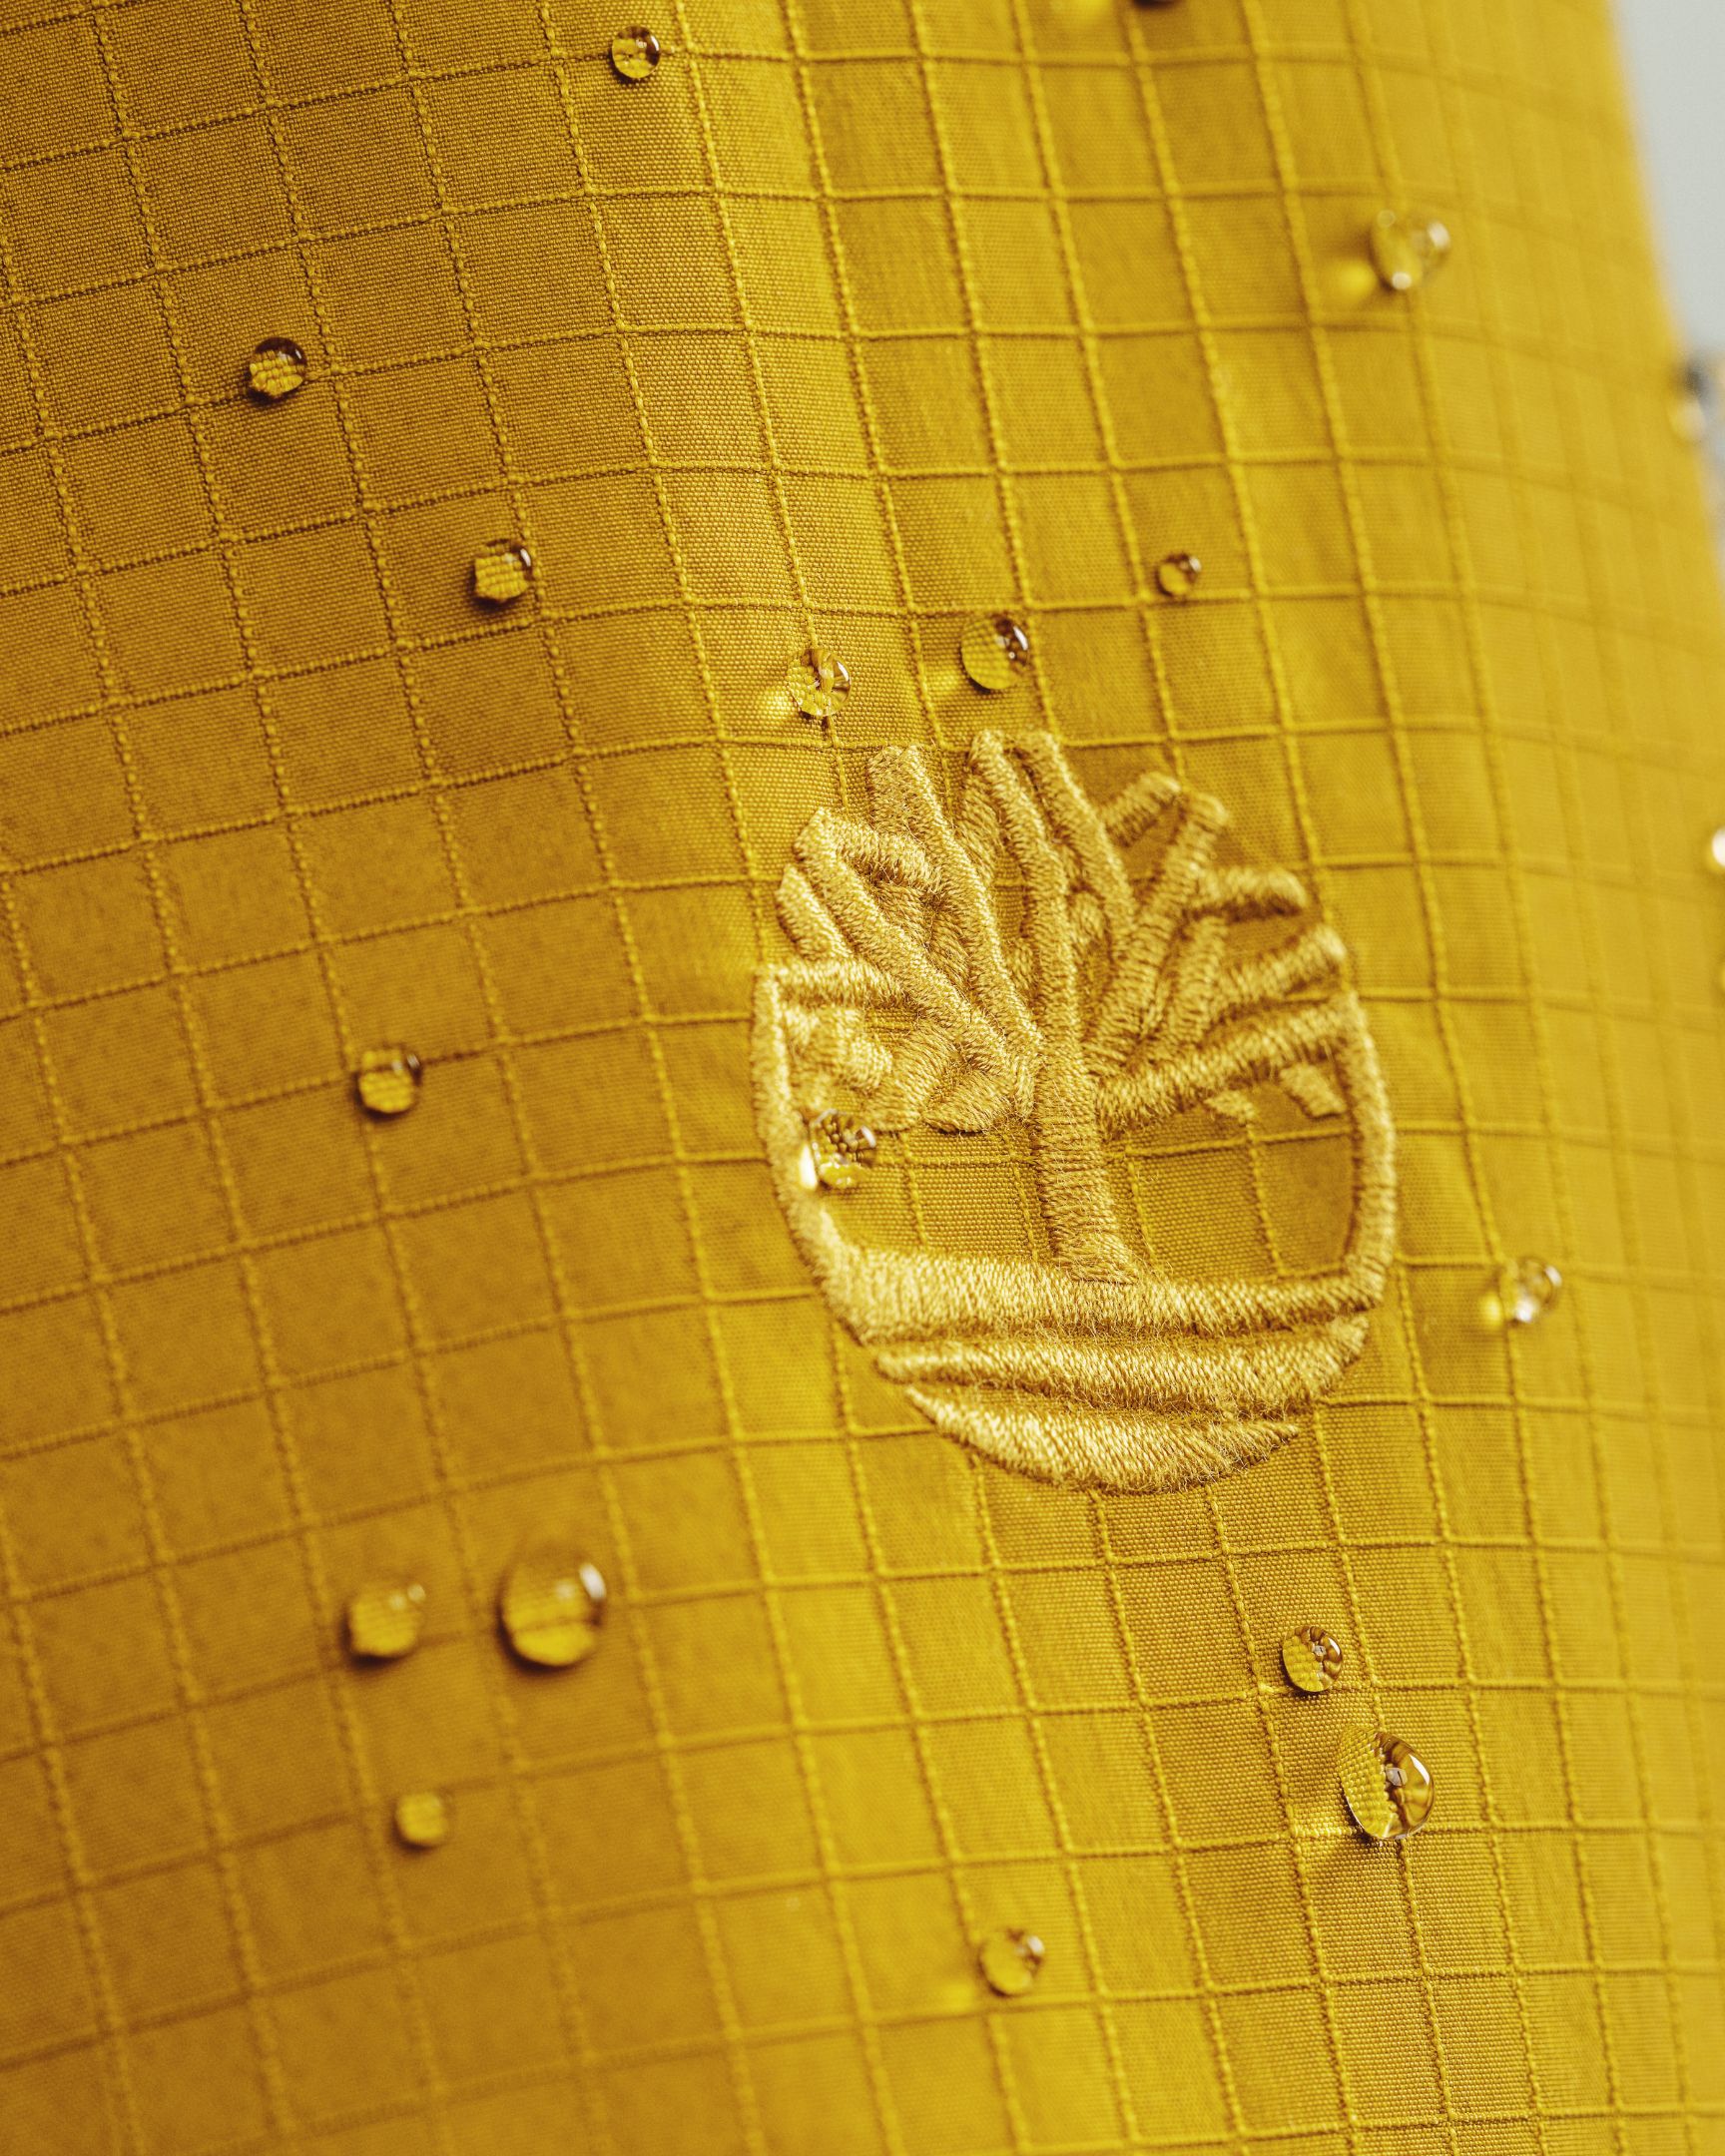 close up of timberland logo on jacket sleeves with water droplets on jacket